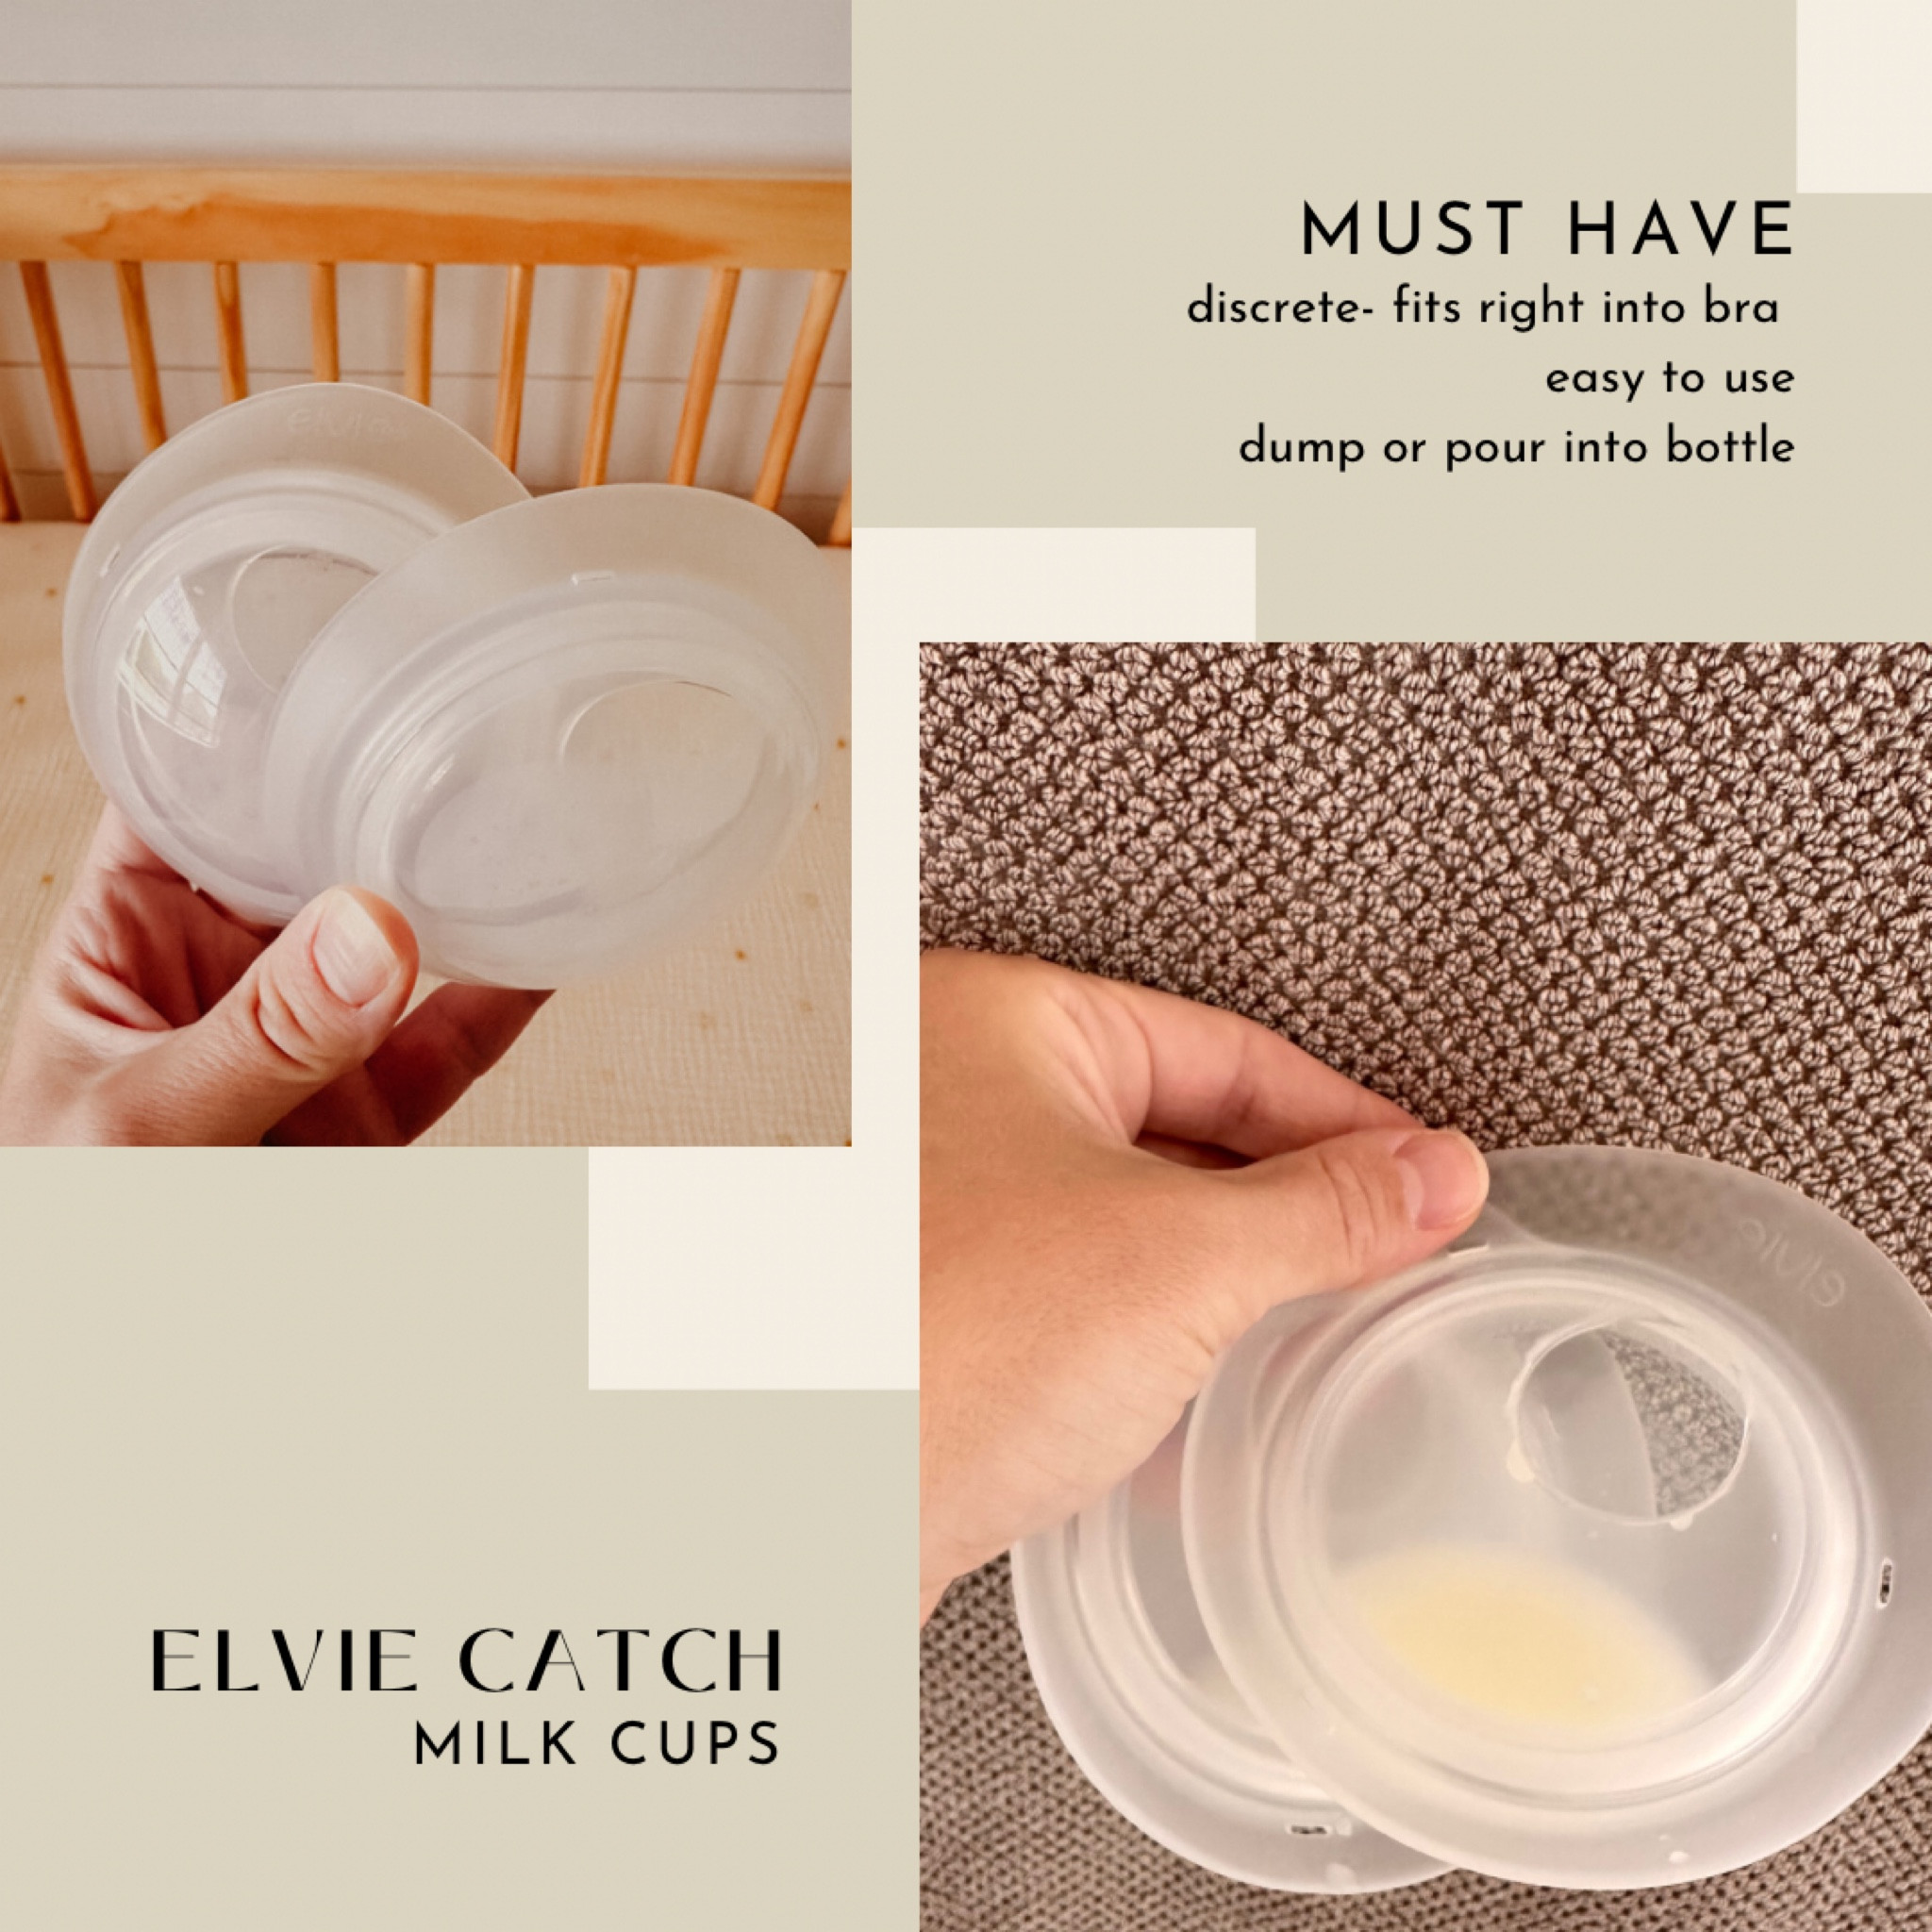 Elvie Catch Secure Milk Collection Cups - 2ct